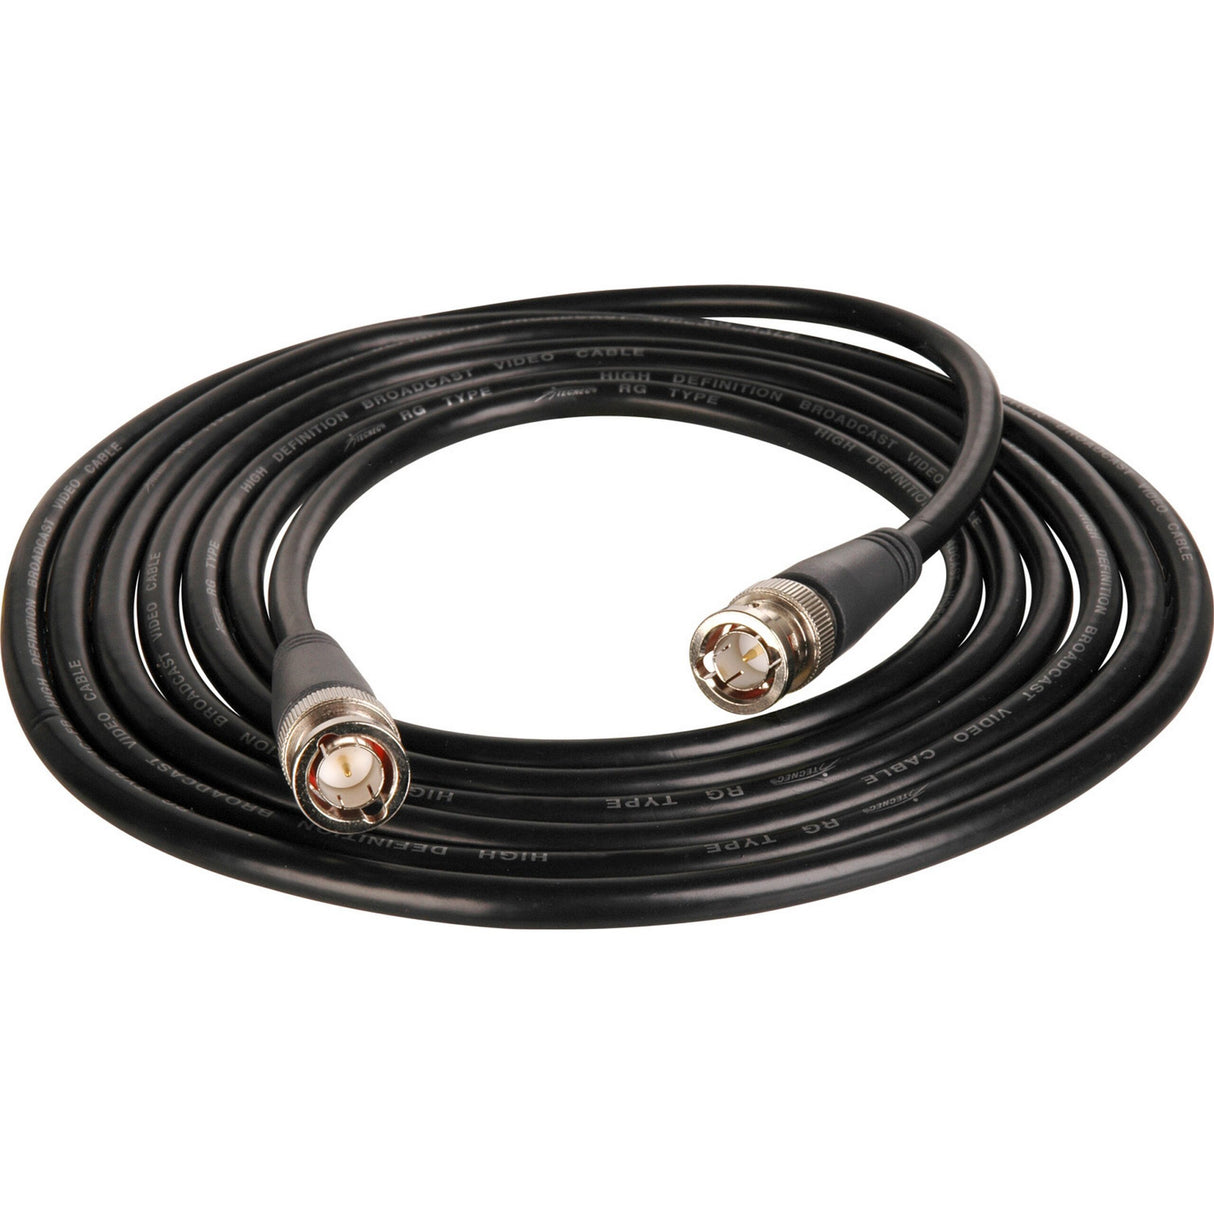 Connectronics B-B-25 Premium 3G-SDI BNC Male to Male Molded Video BNC Cable, 25-Foot